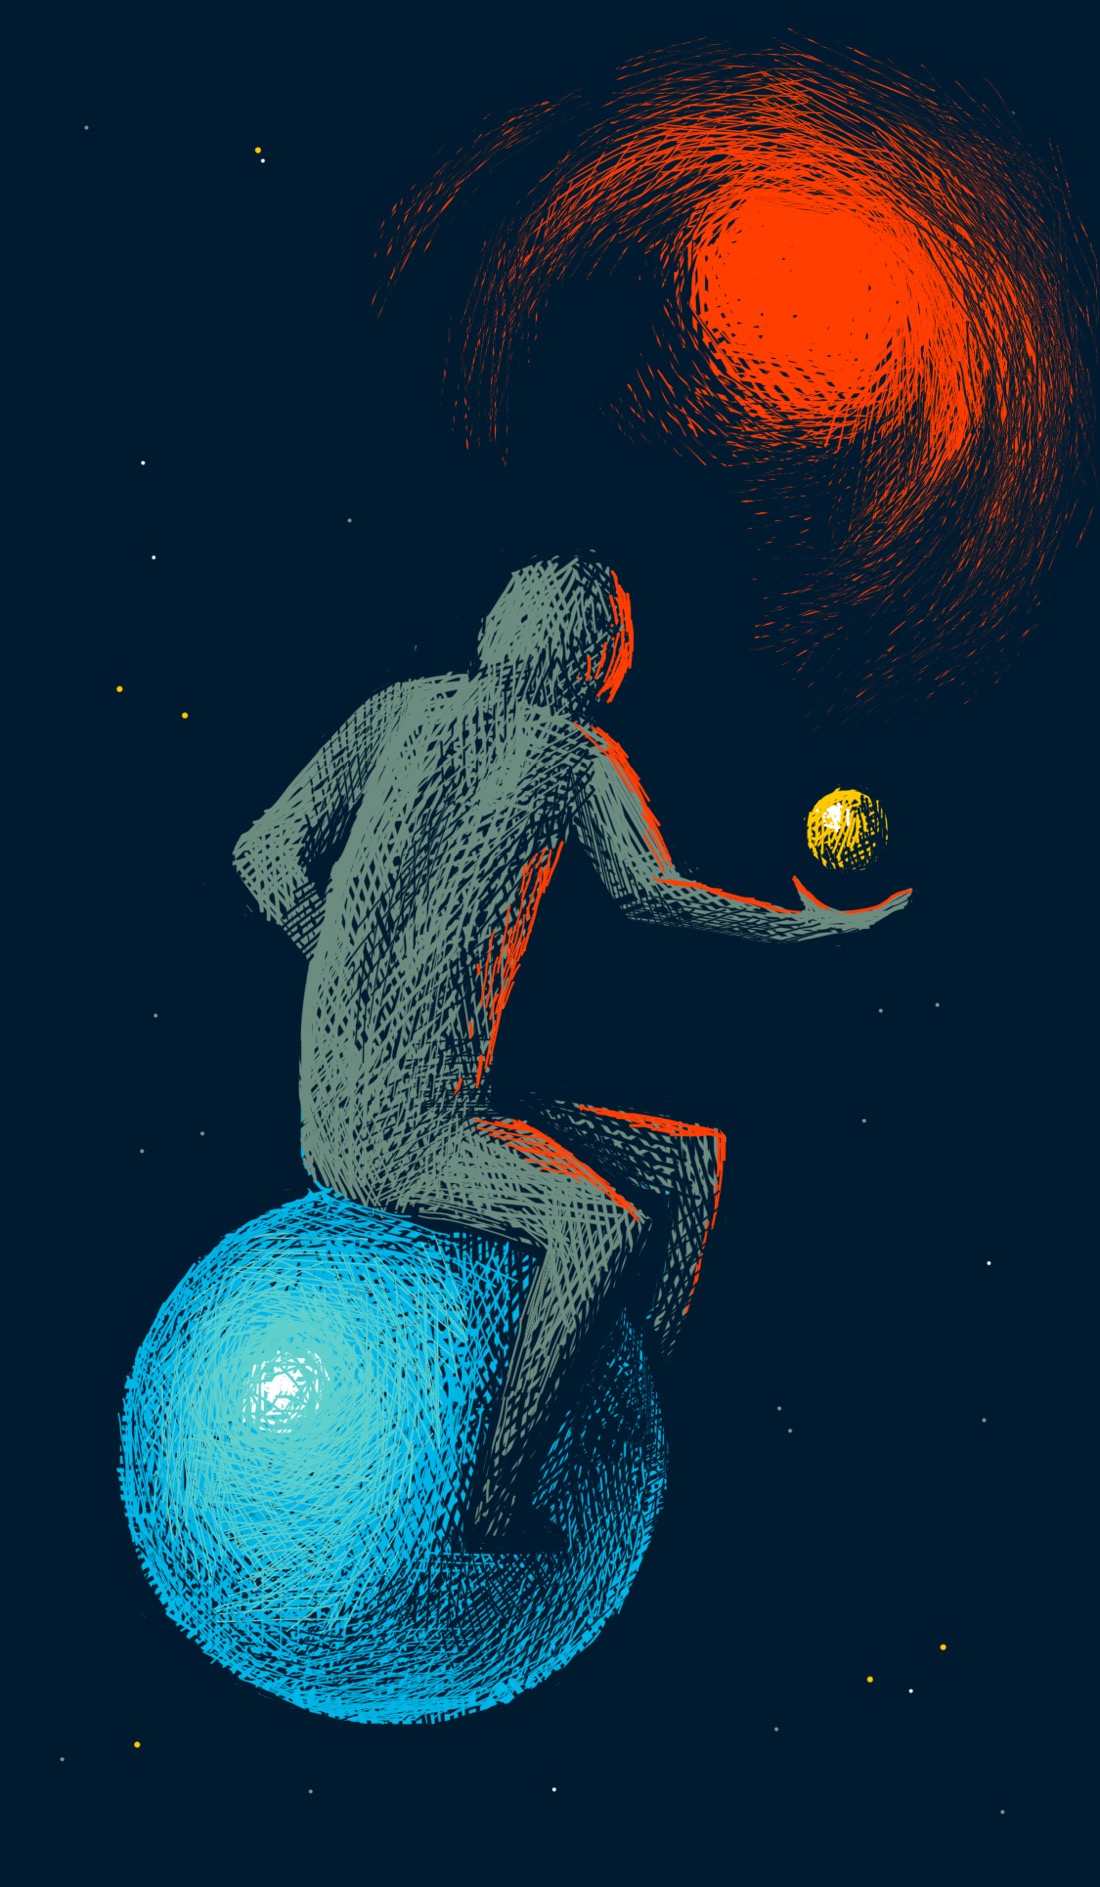 A figure sits on a blue sphere suspended in starry space, staring at a glowing red cloud a ways off. The figure holds a floating yellow ball, as though about to toss it into the cloud.